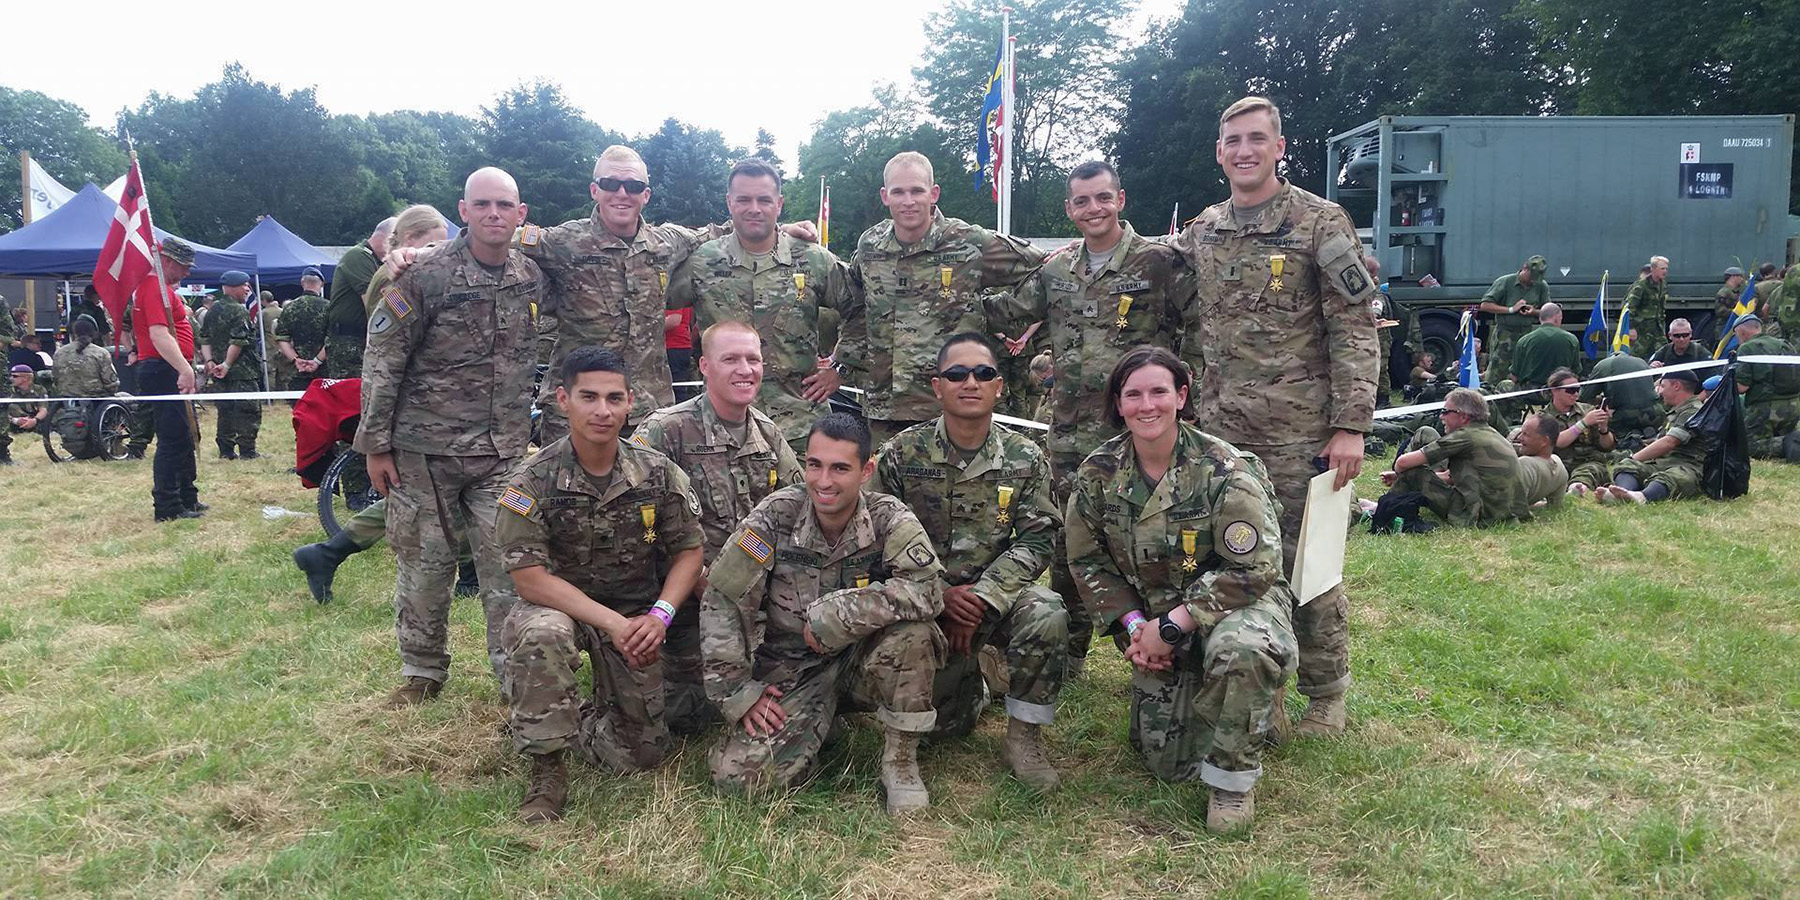 University of Iowa dental student and Army Veteran Zach Graham stands with fellow service members who went on a four-day, 100-mile march across the Netherlands